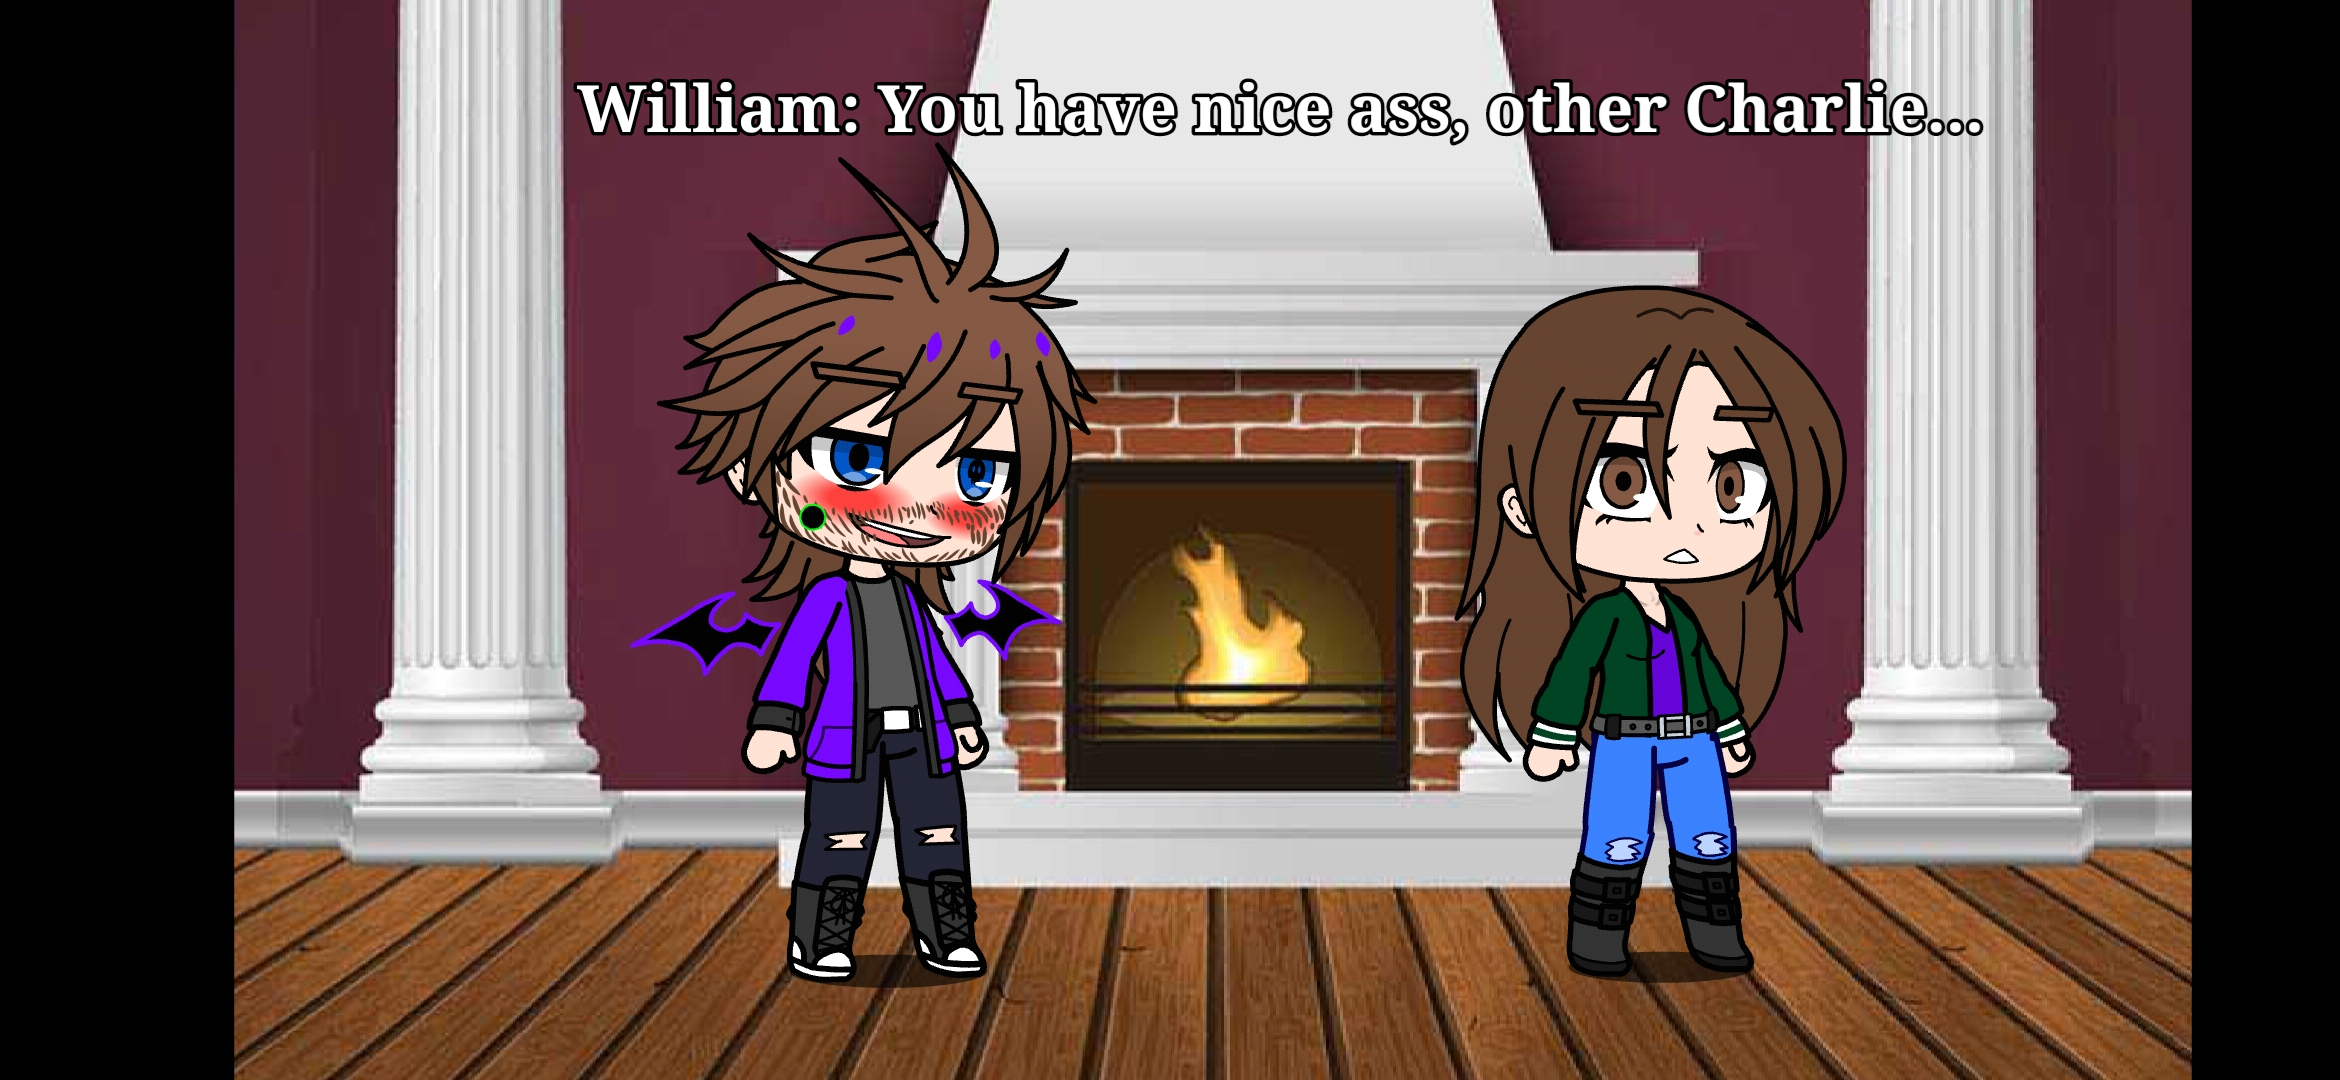 William Afton fuck Book Charlie Emily